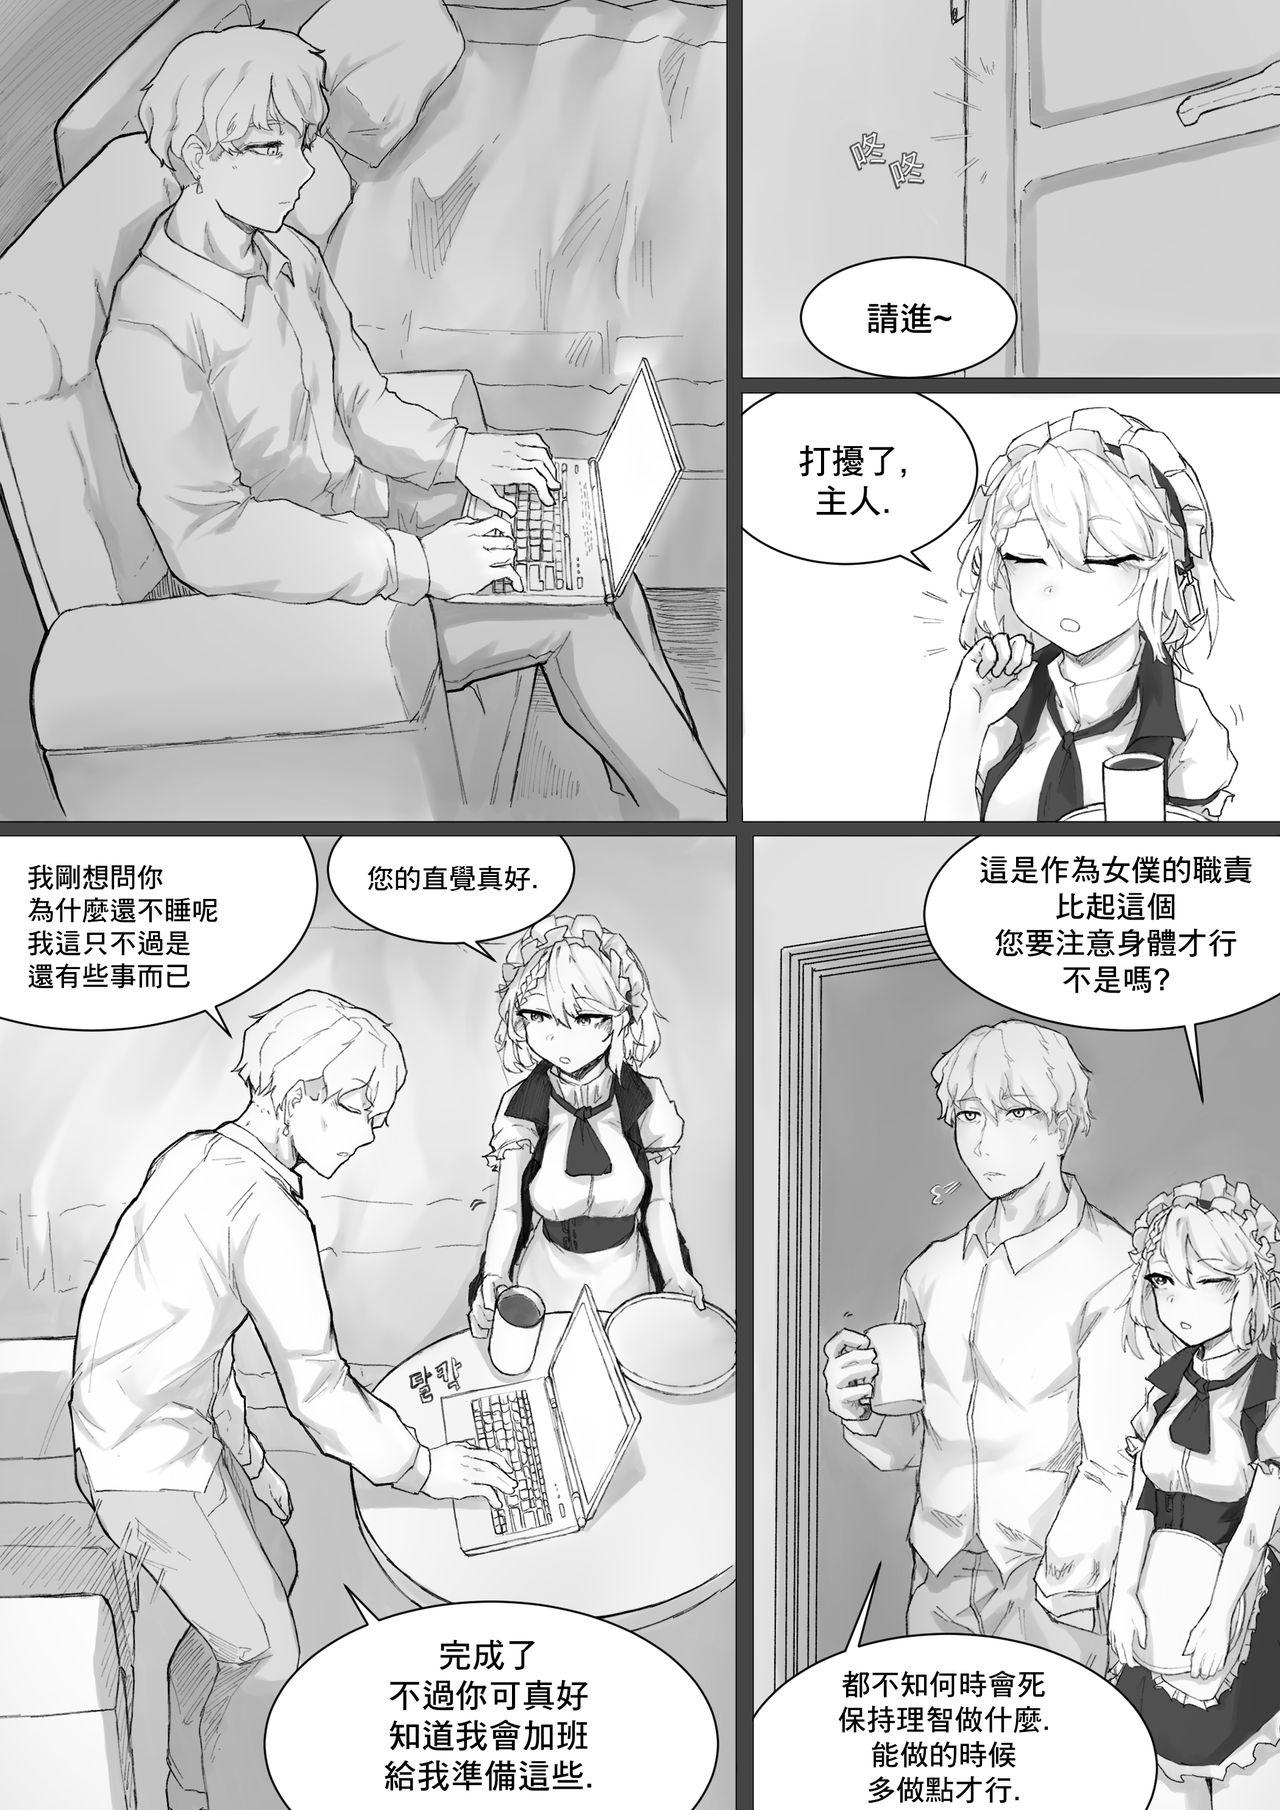 Tributo How To Use G36 - Girls frontline Girlfriends - Page 4